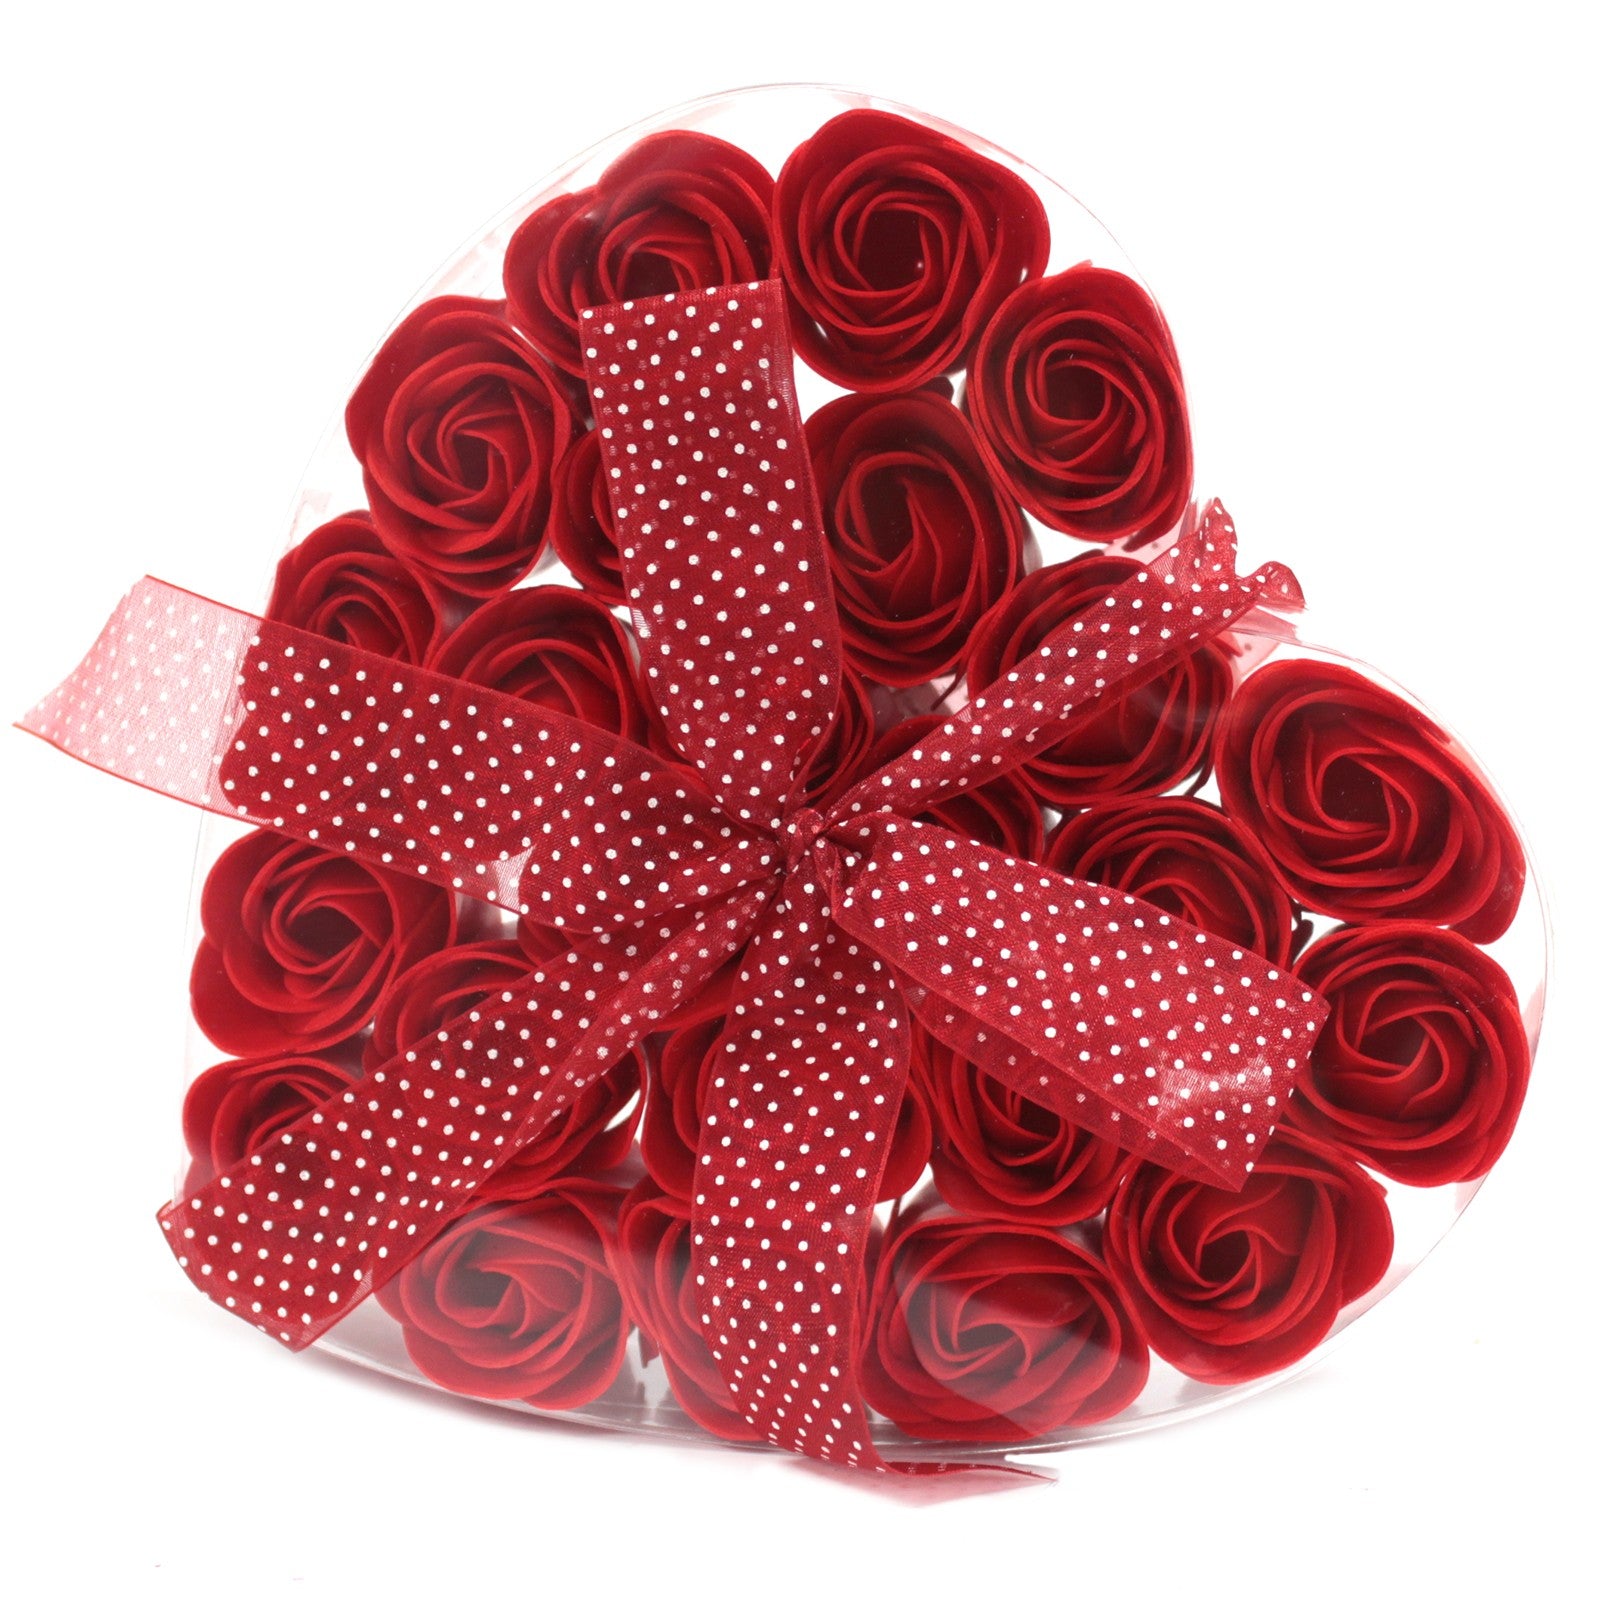 View Set of 24 Soap Flower Heart Box Red Roses information